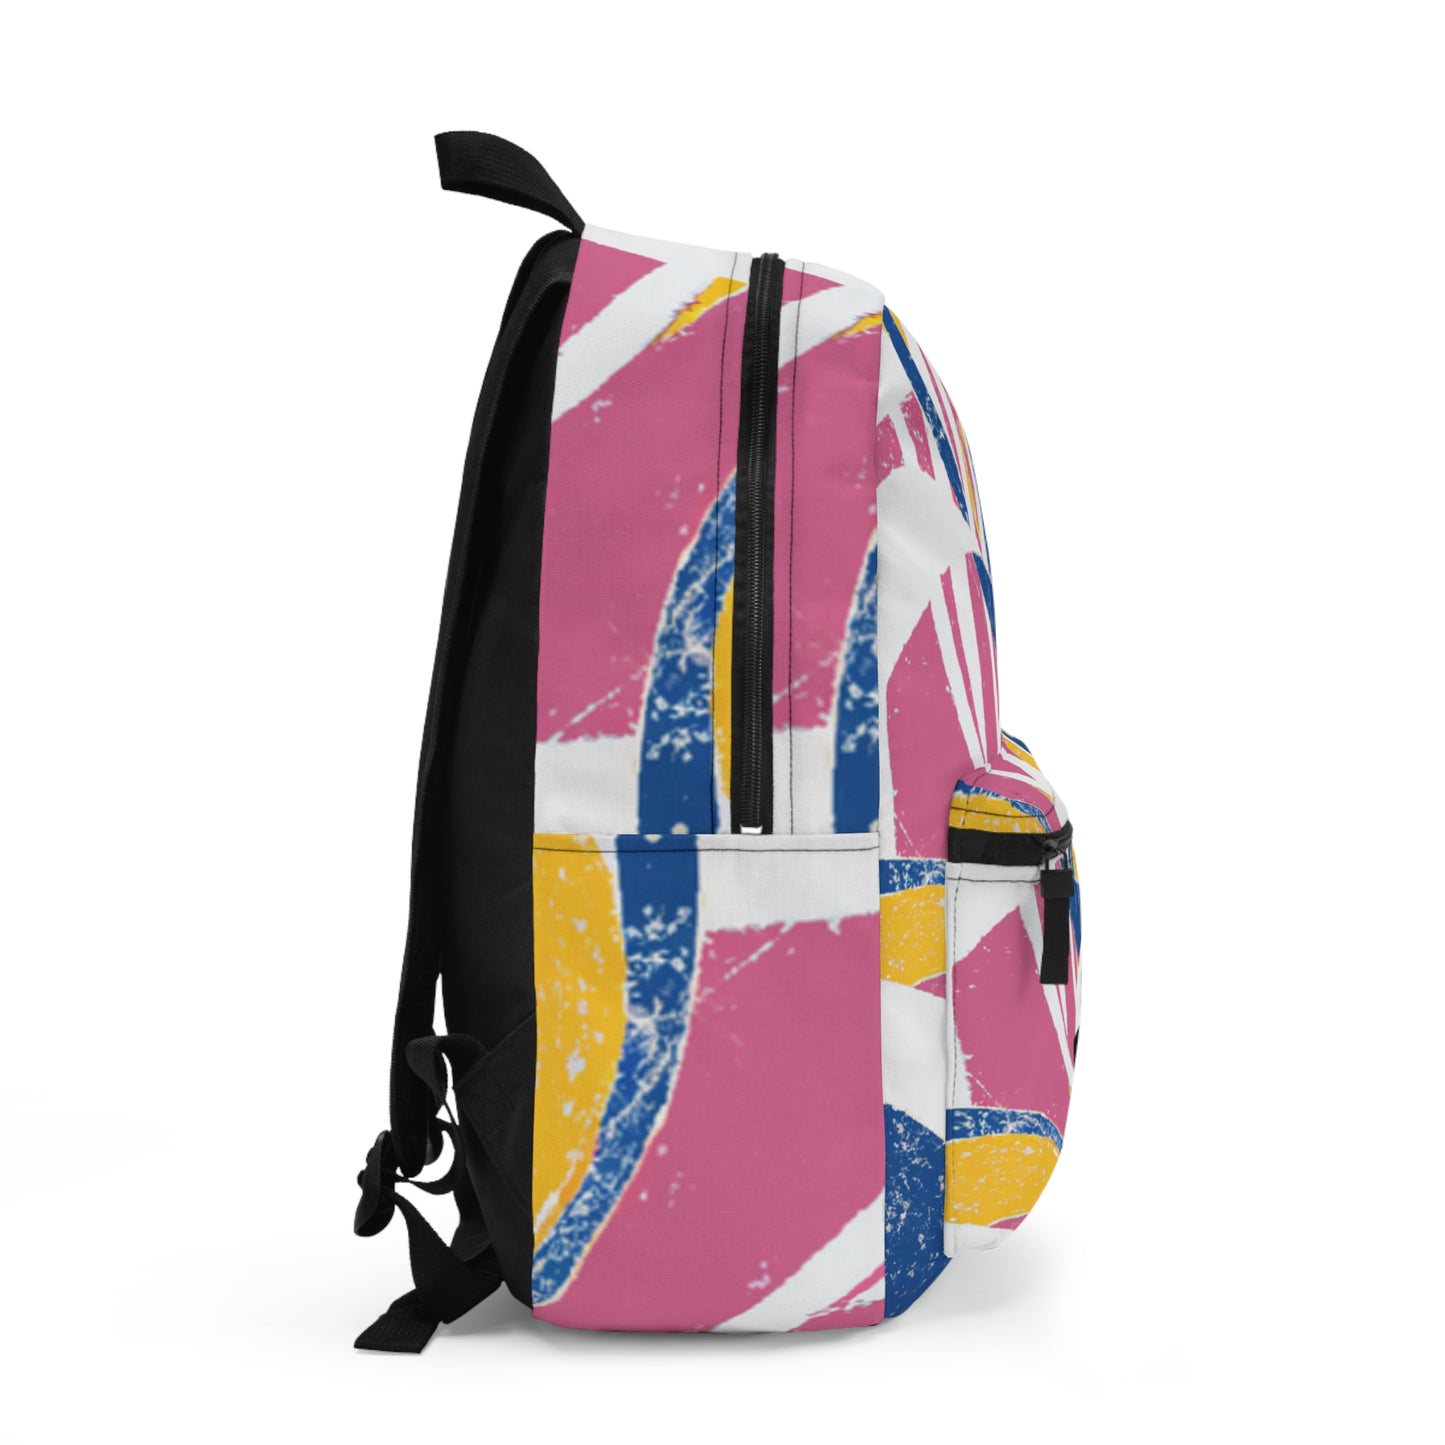 :

Isabella de LaFontaine Backpack